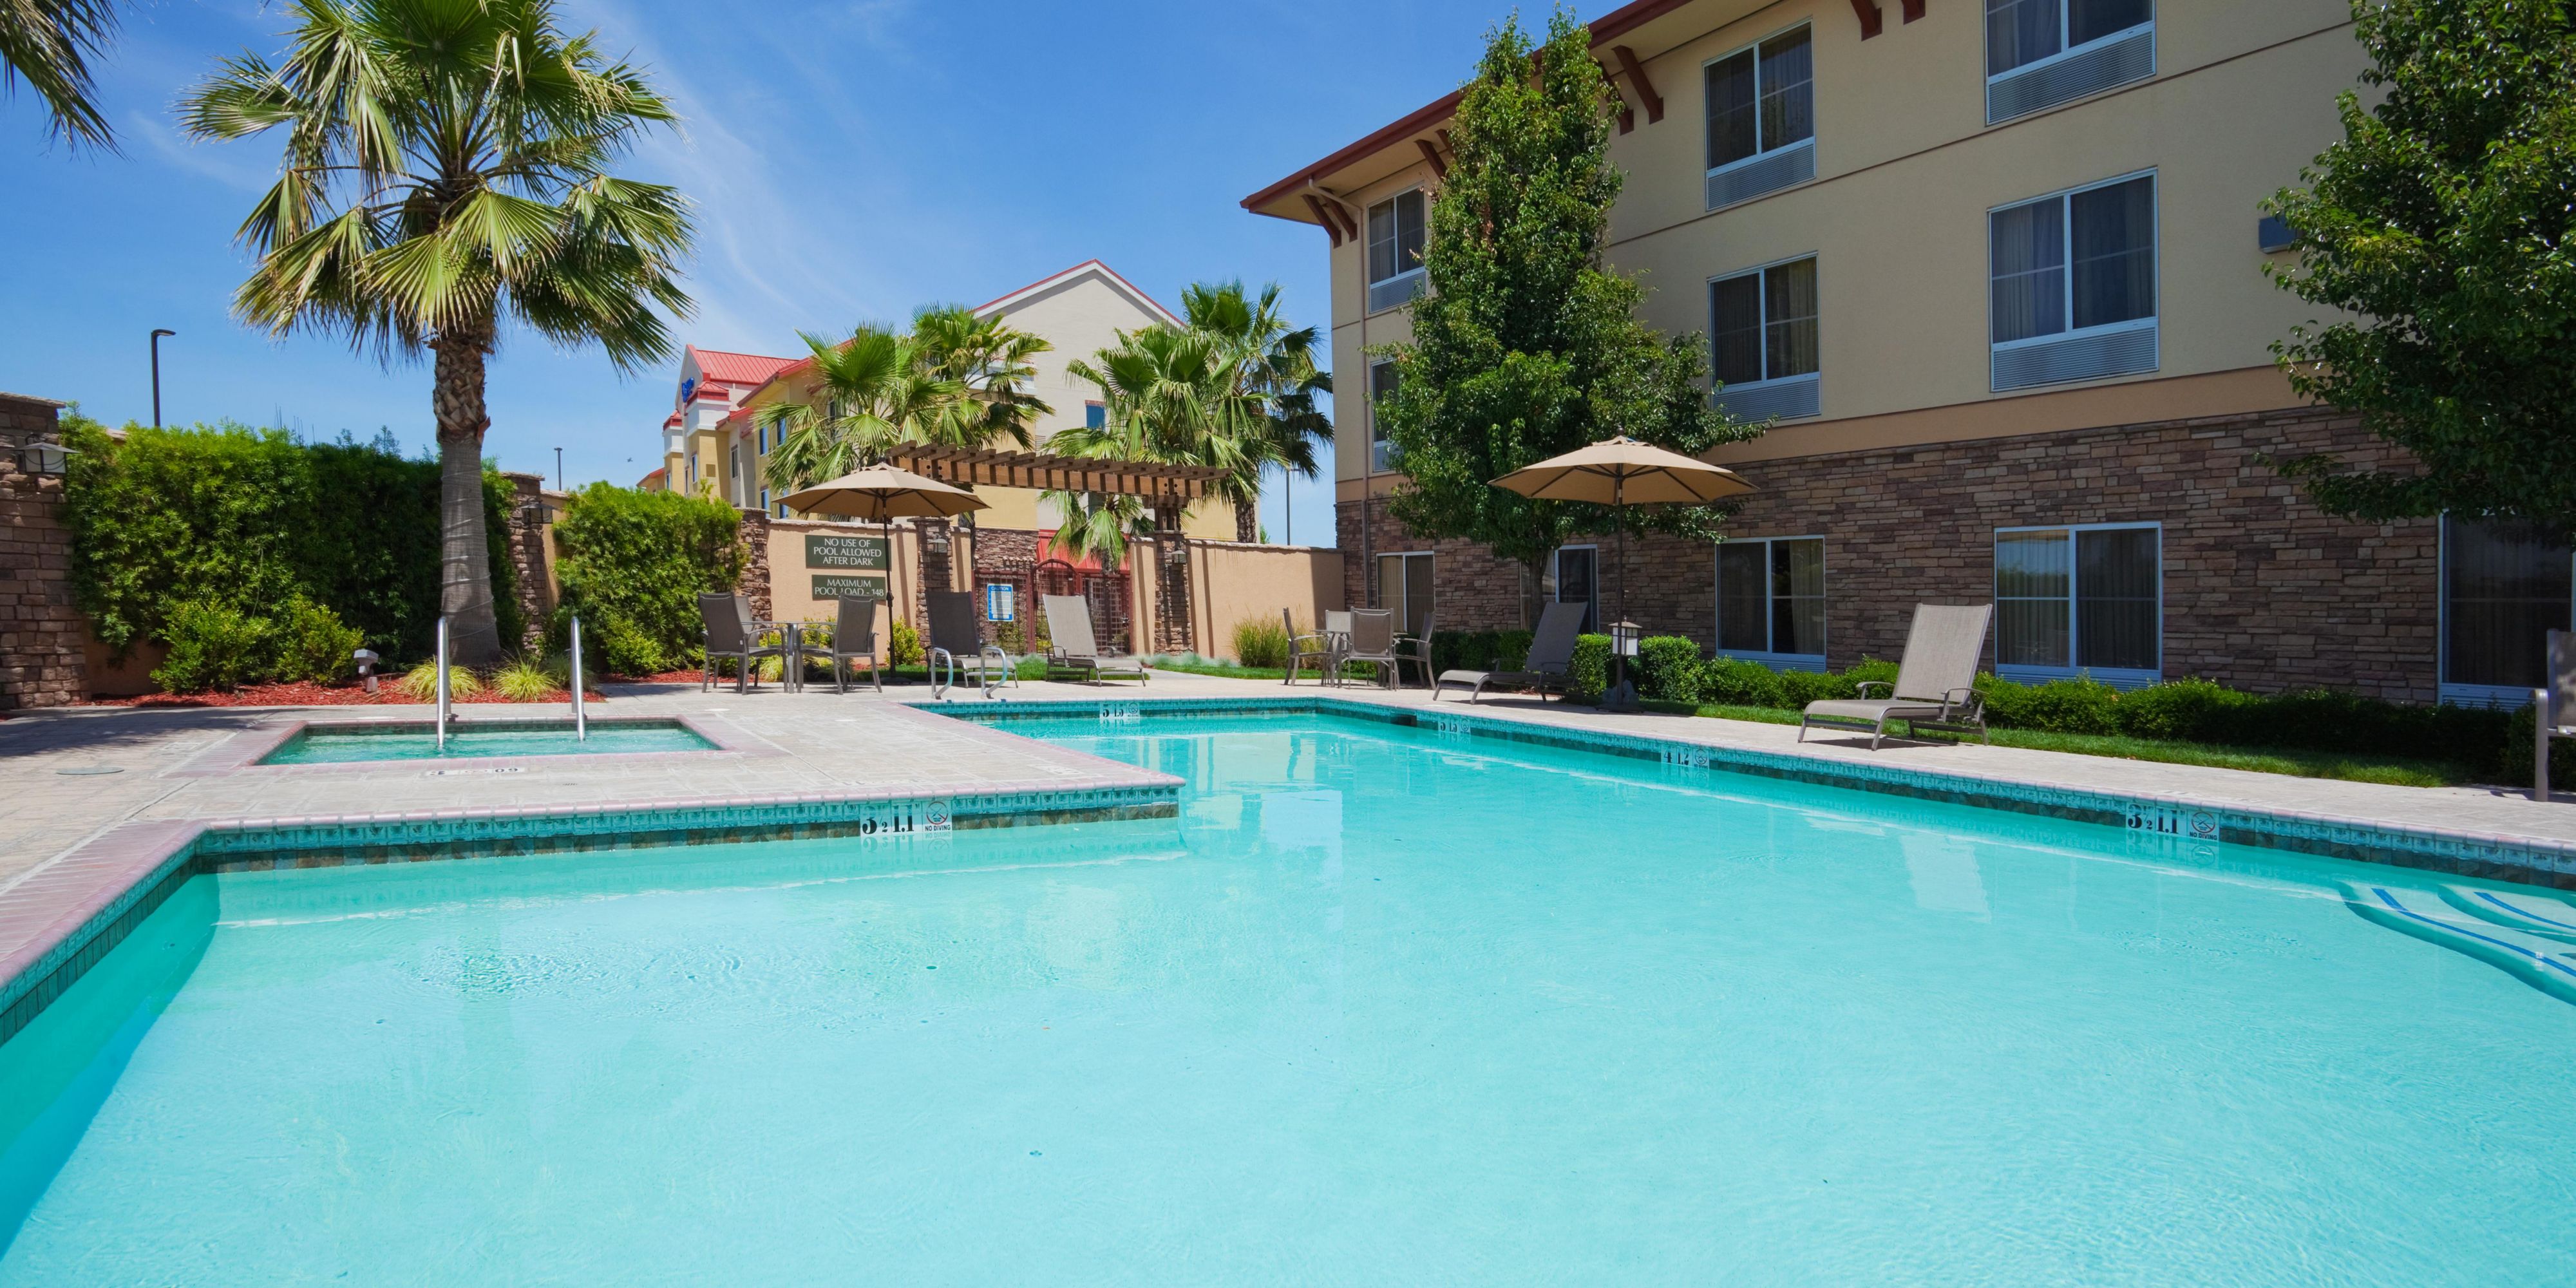 Holiday Inn Express, Turlock has the BEST and Largest pool compared to other hotels! Our pool and spa is surrounded by tall Palm Trees - giving our guests a feeling of a Tropical vacation while visiting the Central Valley! Protective concrete walls keeps our pool area restricted and private. Book your next stay and enjoy our crystal clear pool!